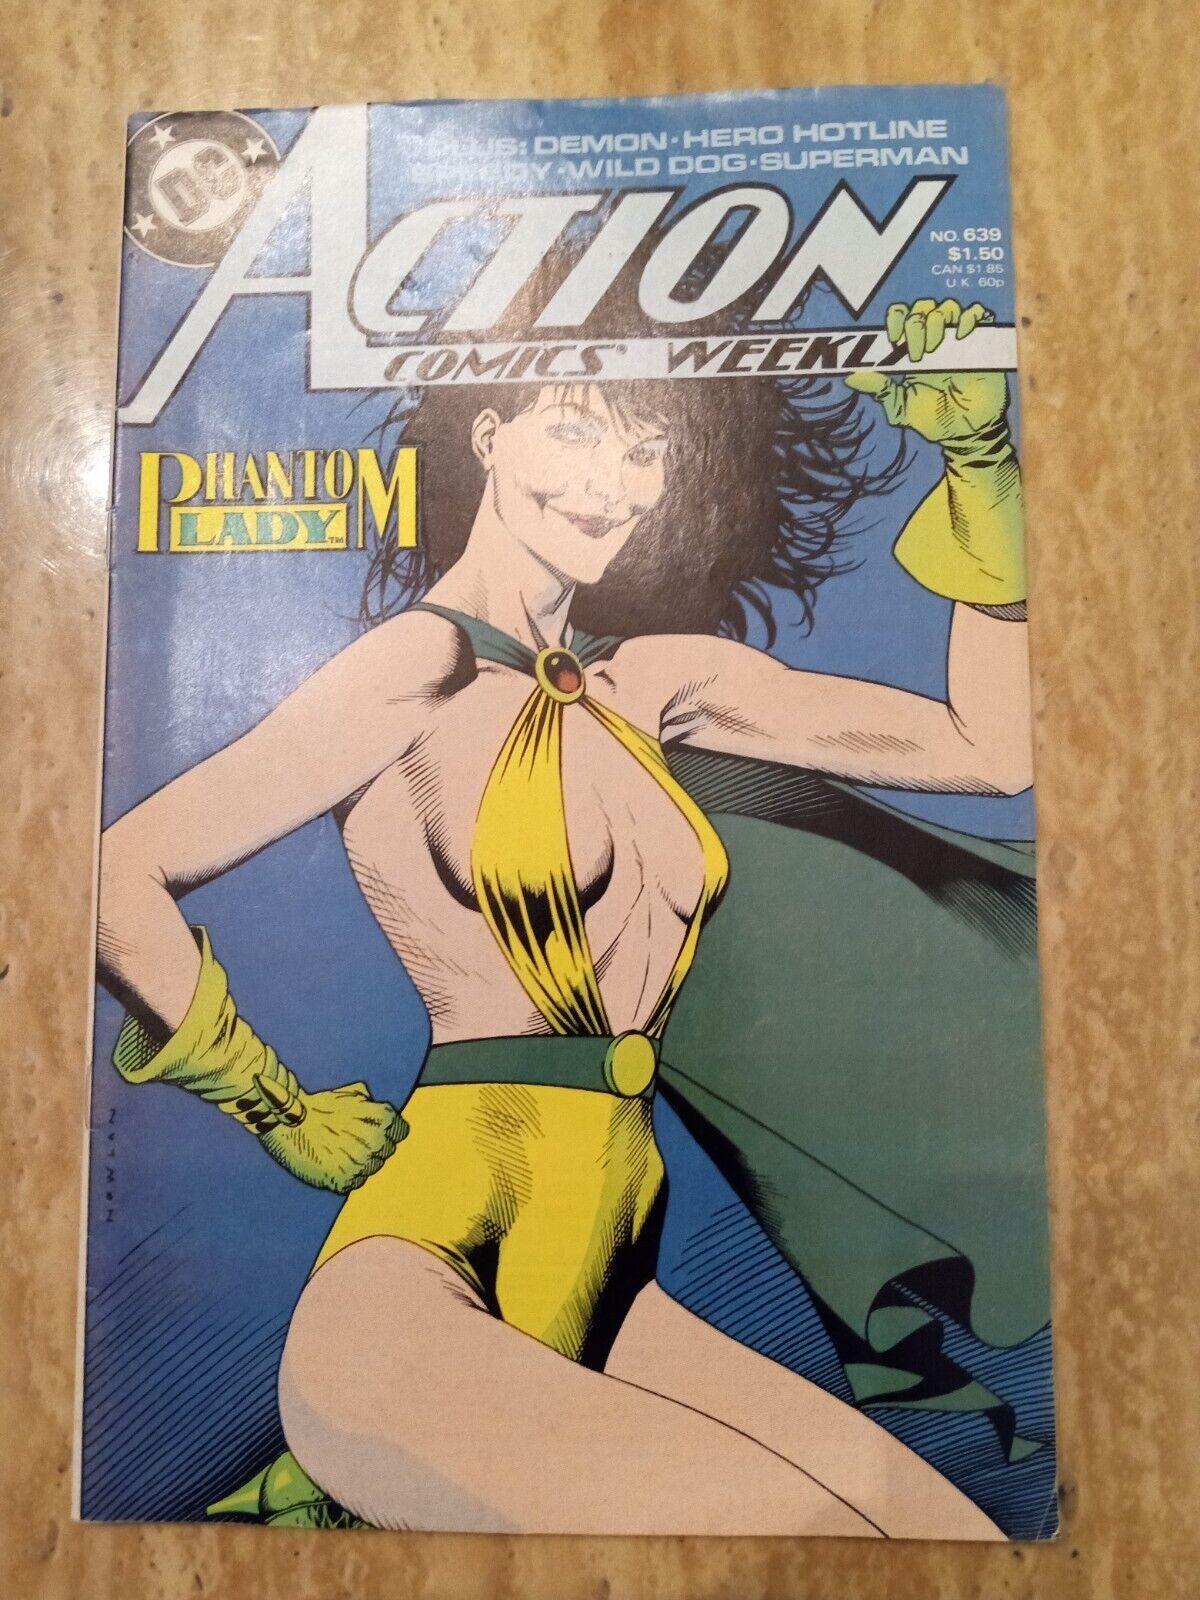 💥 1989 Action Comics Weekly Phantom Lady Comic Issue #639 639 FREE SHIPPING